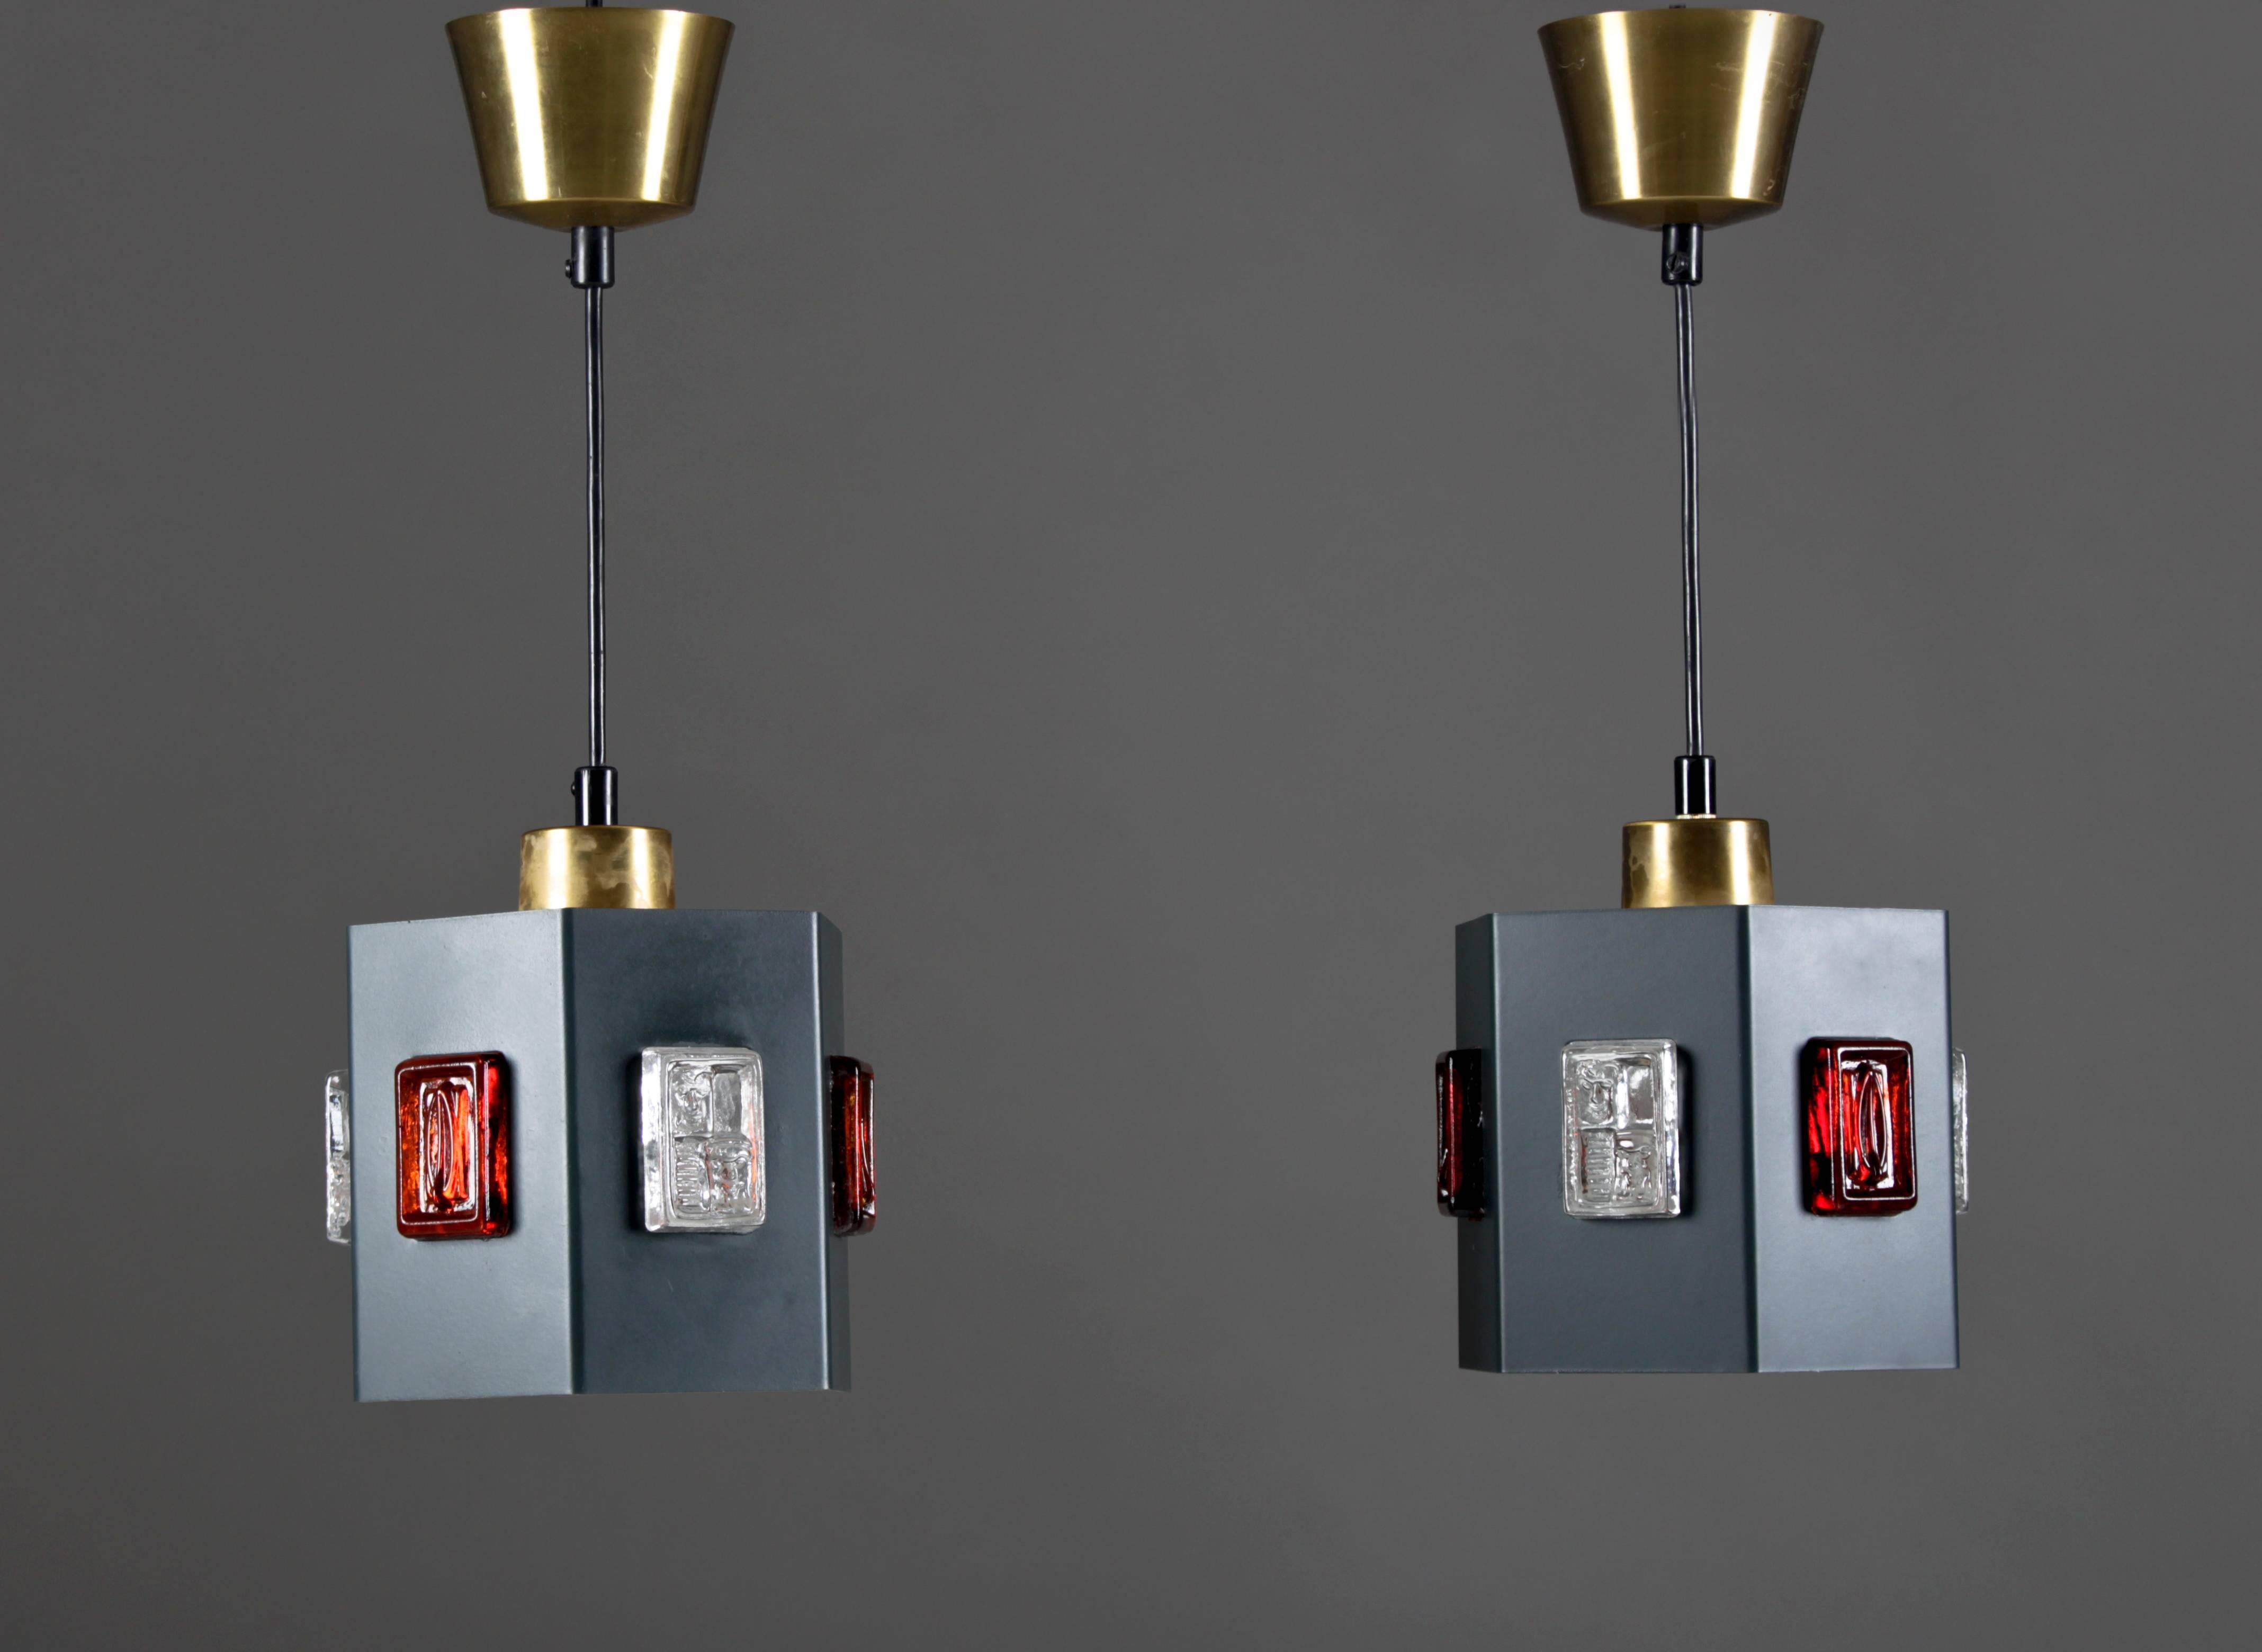 High-quality ceiling lights in brass, lacquered metal and glass. Simple cubist shapes and superb color matching give these lamps something extra. The lamps are made by Einar Bäckström and the glass parts by Erik Höglund. The brass parts have a